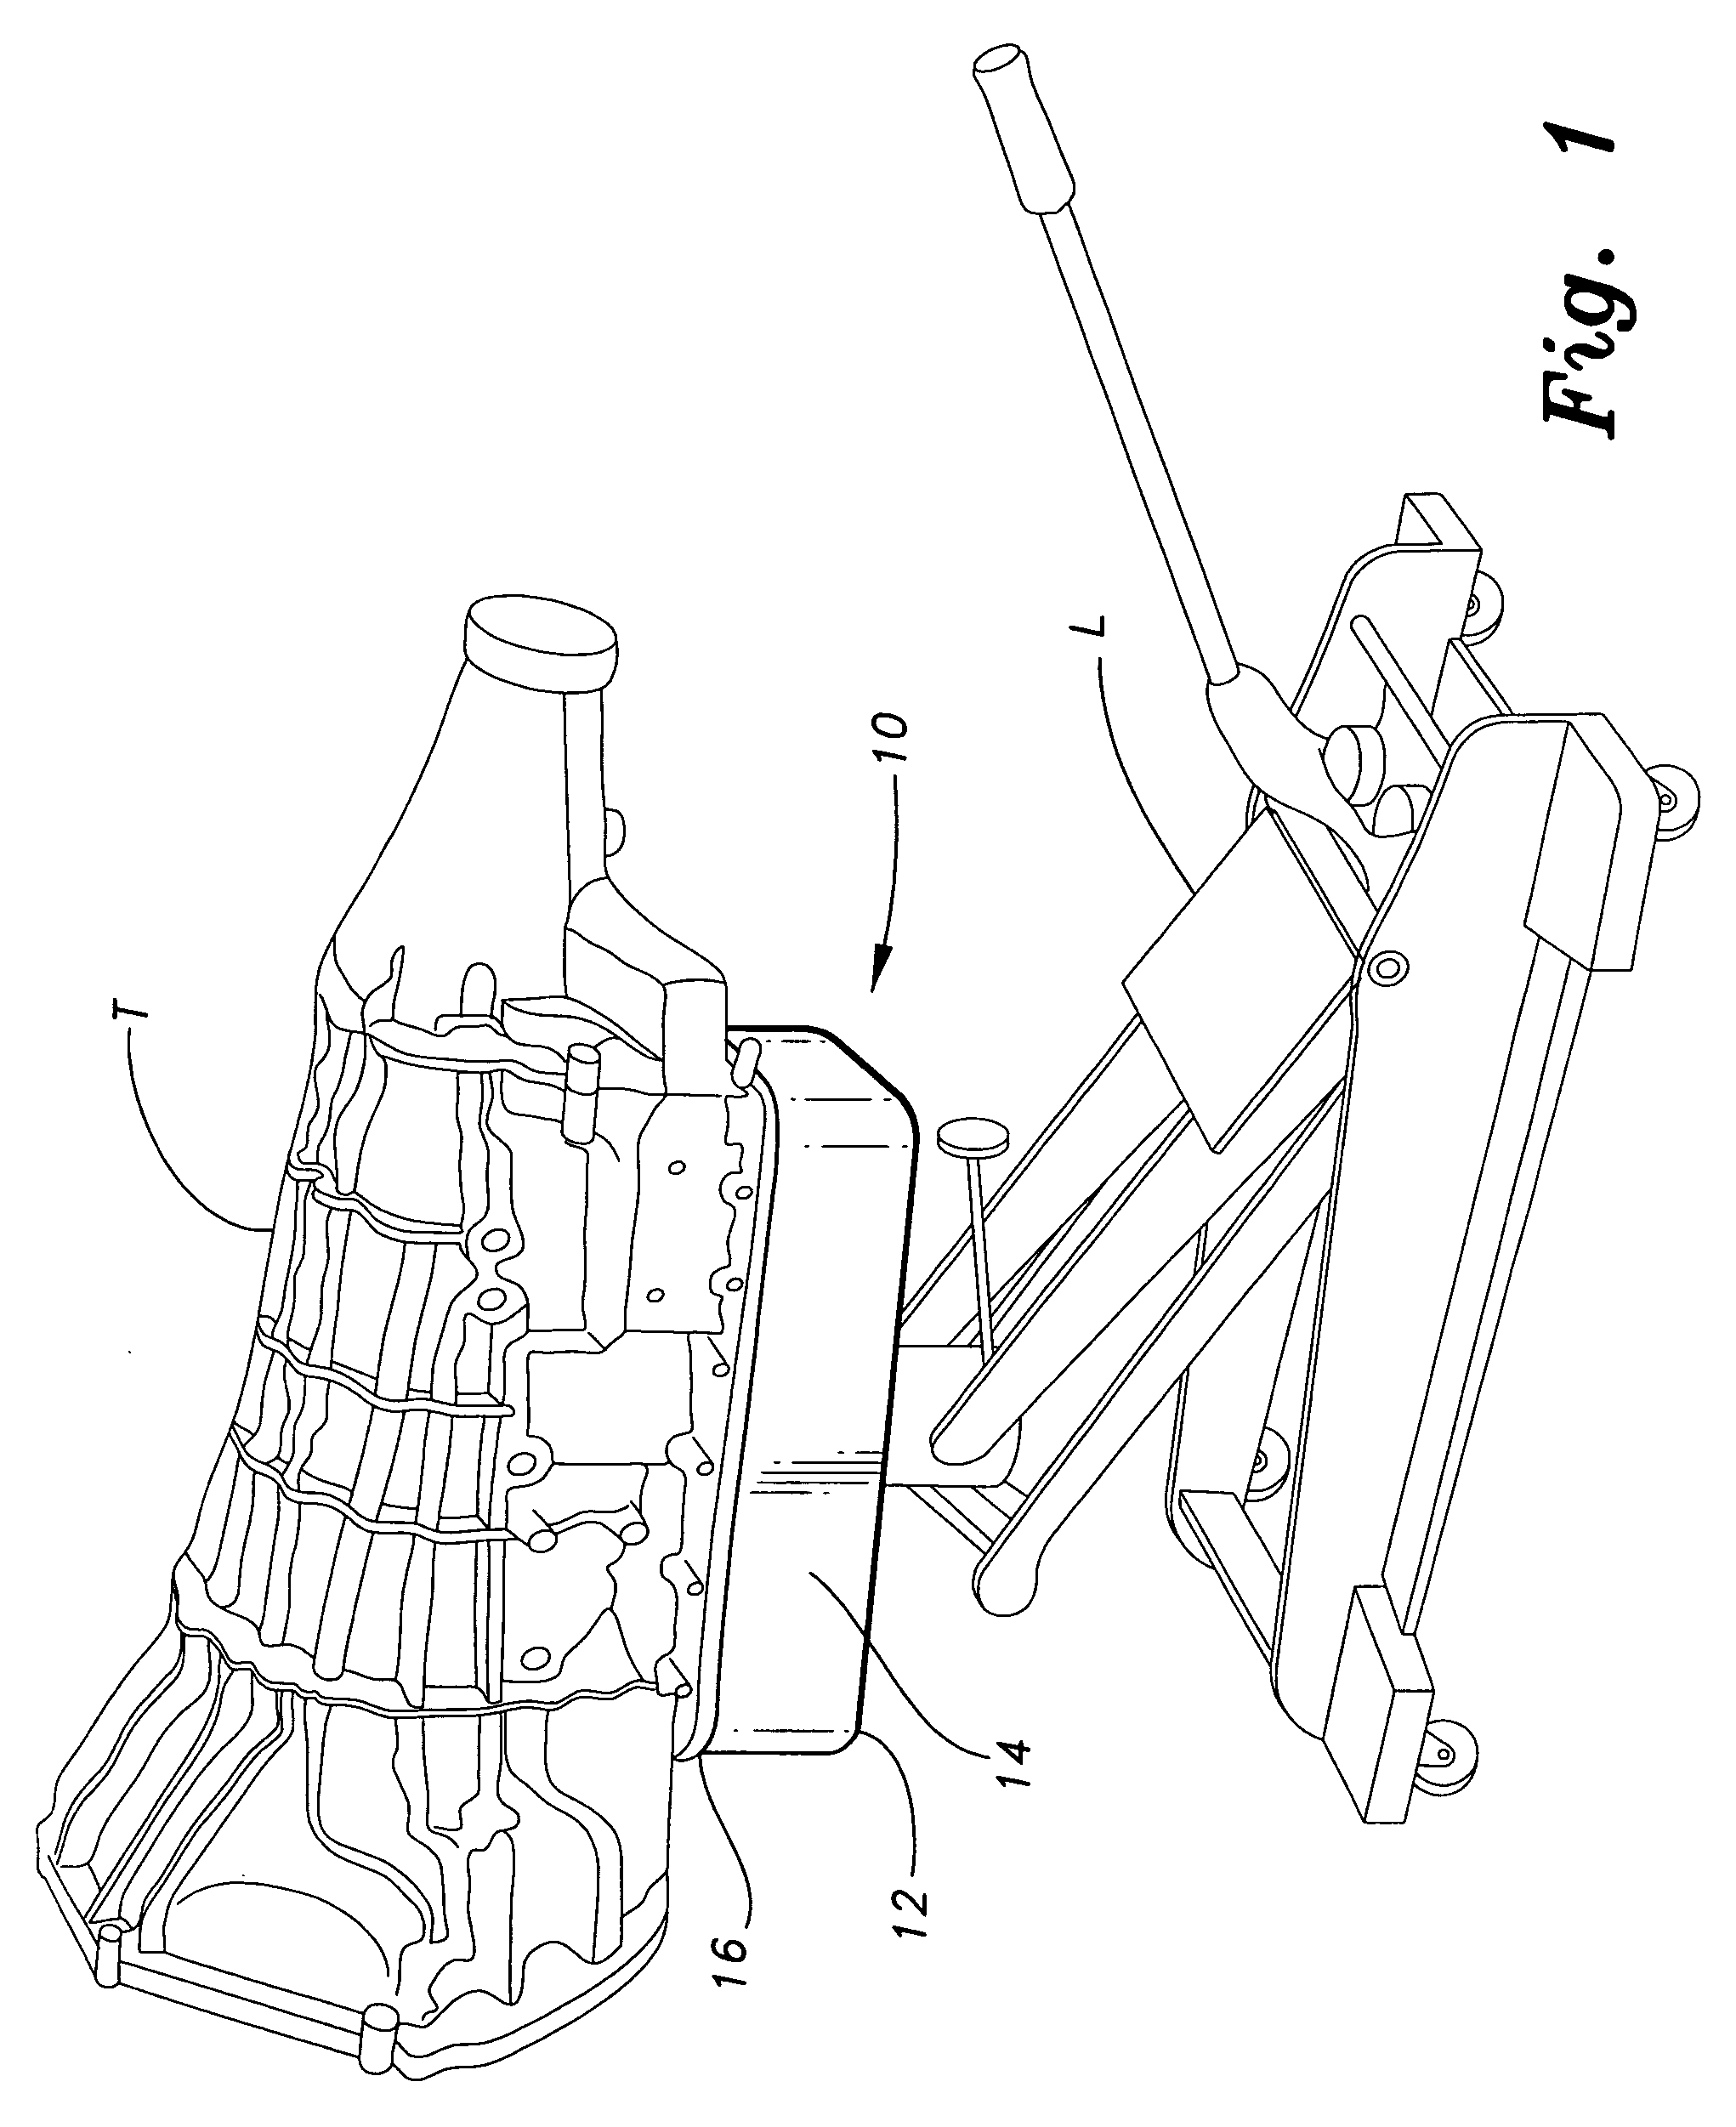 Stabilizer to aid in installation and removal of a transmission